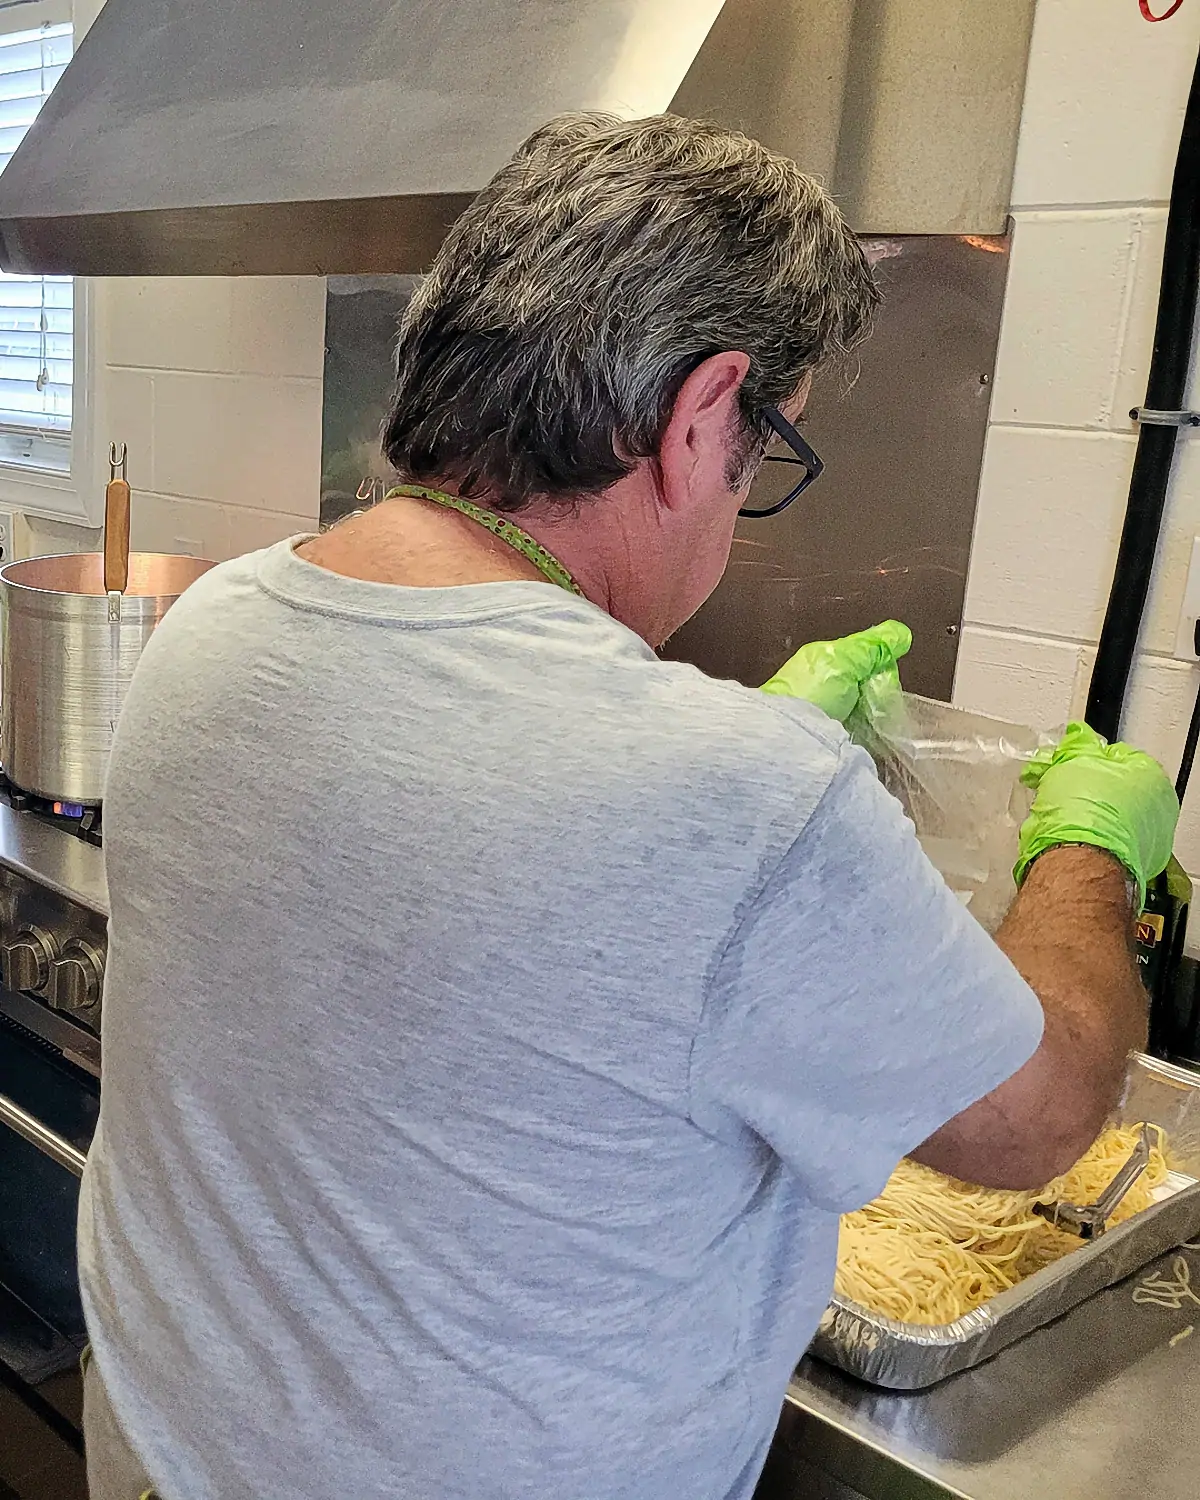 Ron Kelly keeping an eye on the pasta while cooking at the Spaghetti Dinner